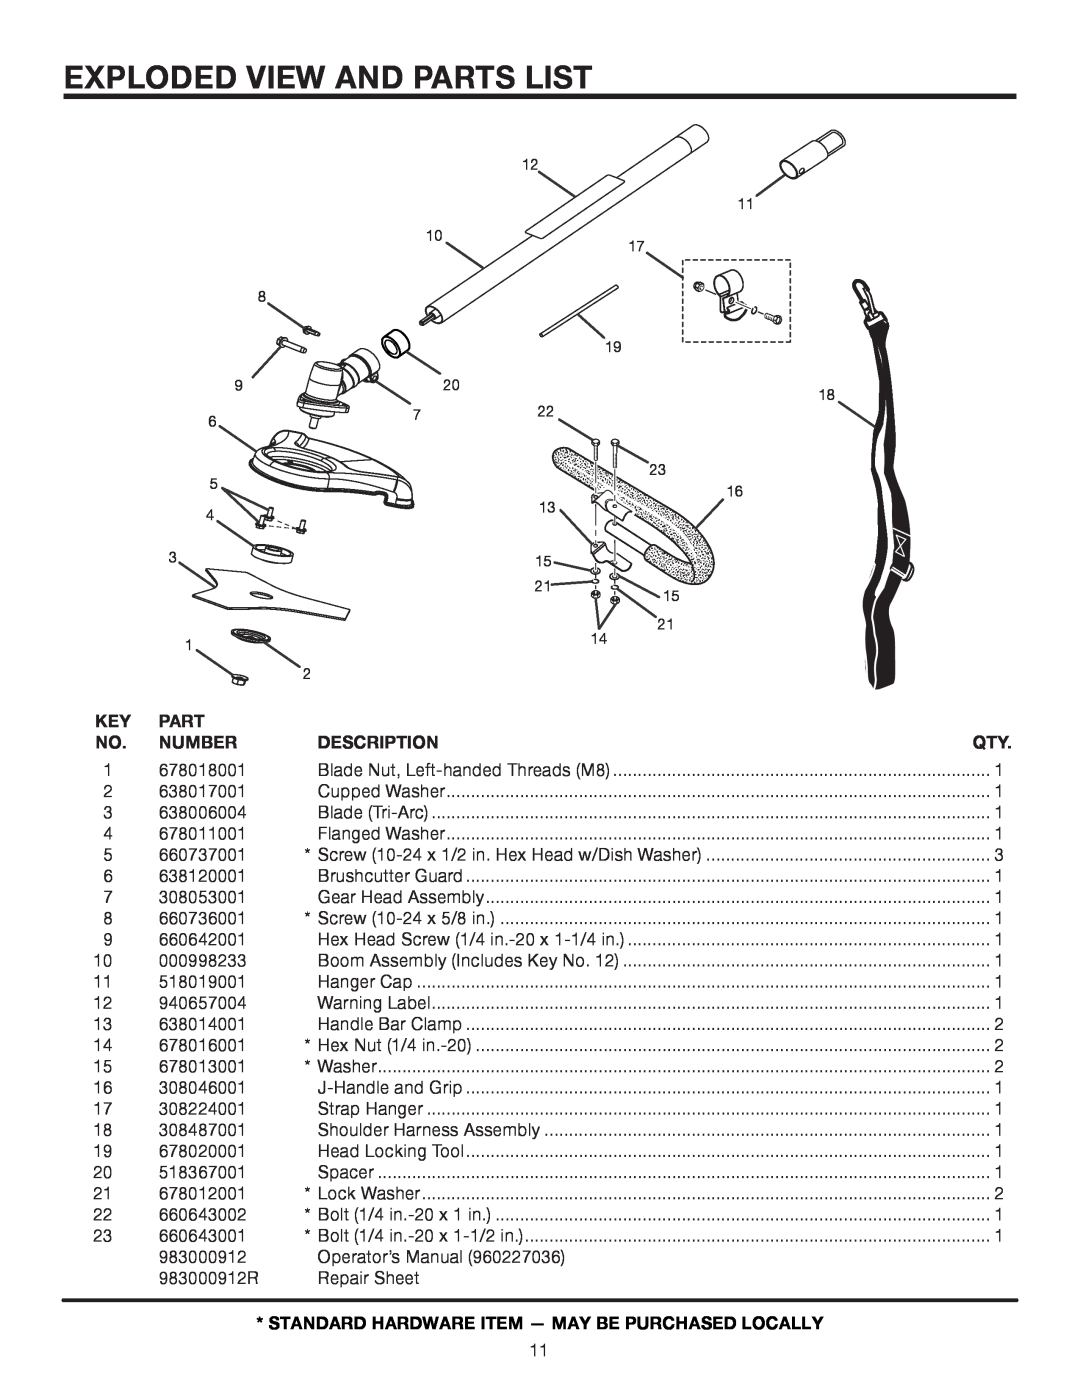 Ryobi UT15702B manual Exploded View And Parts List, Number, Description, Standard Hardware Item - May Be Purchased Locally 